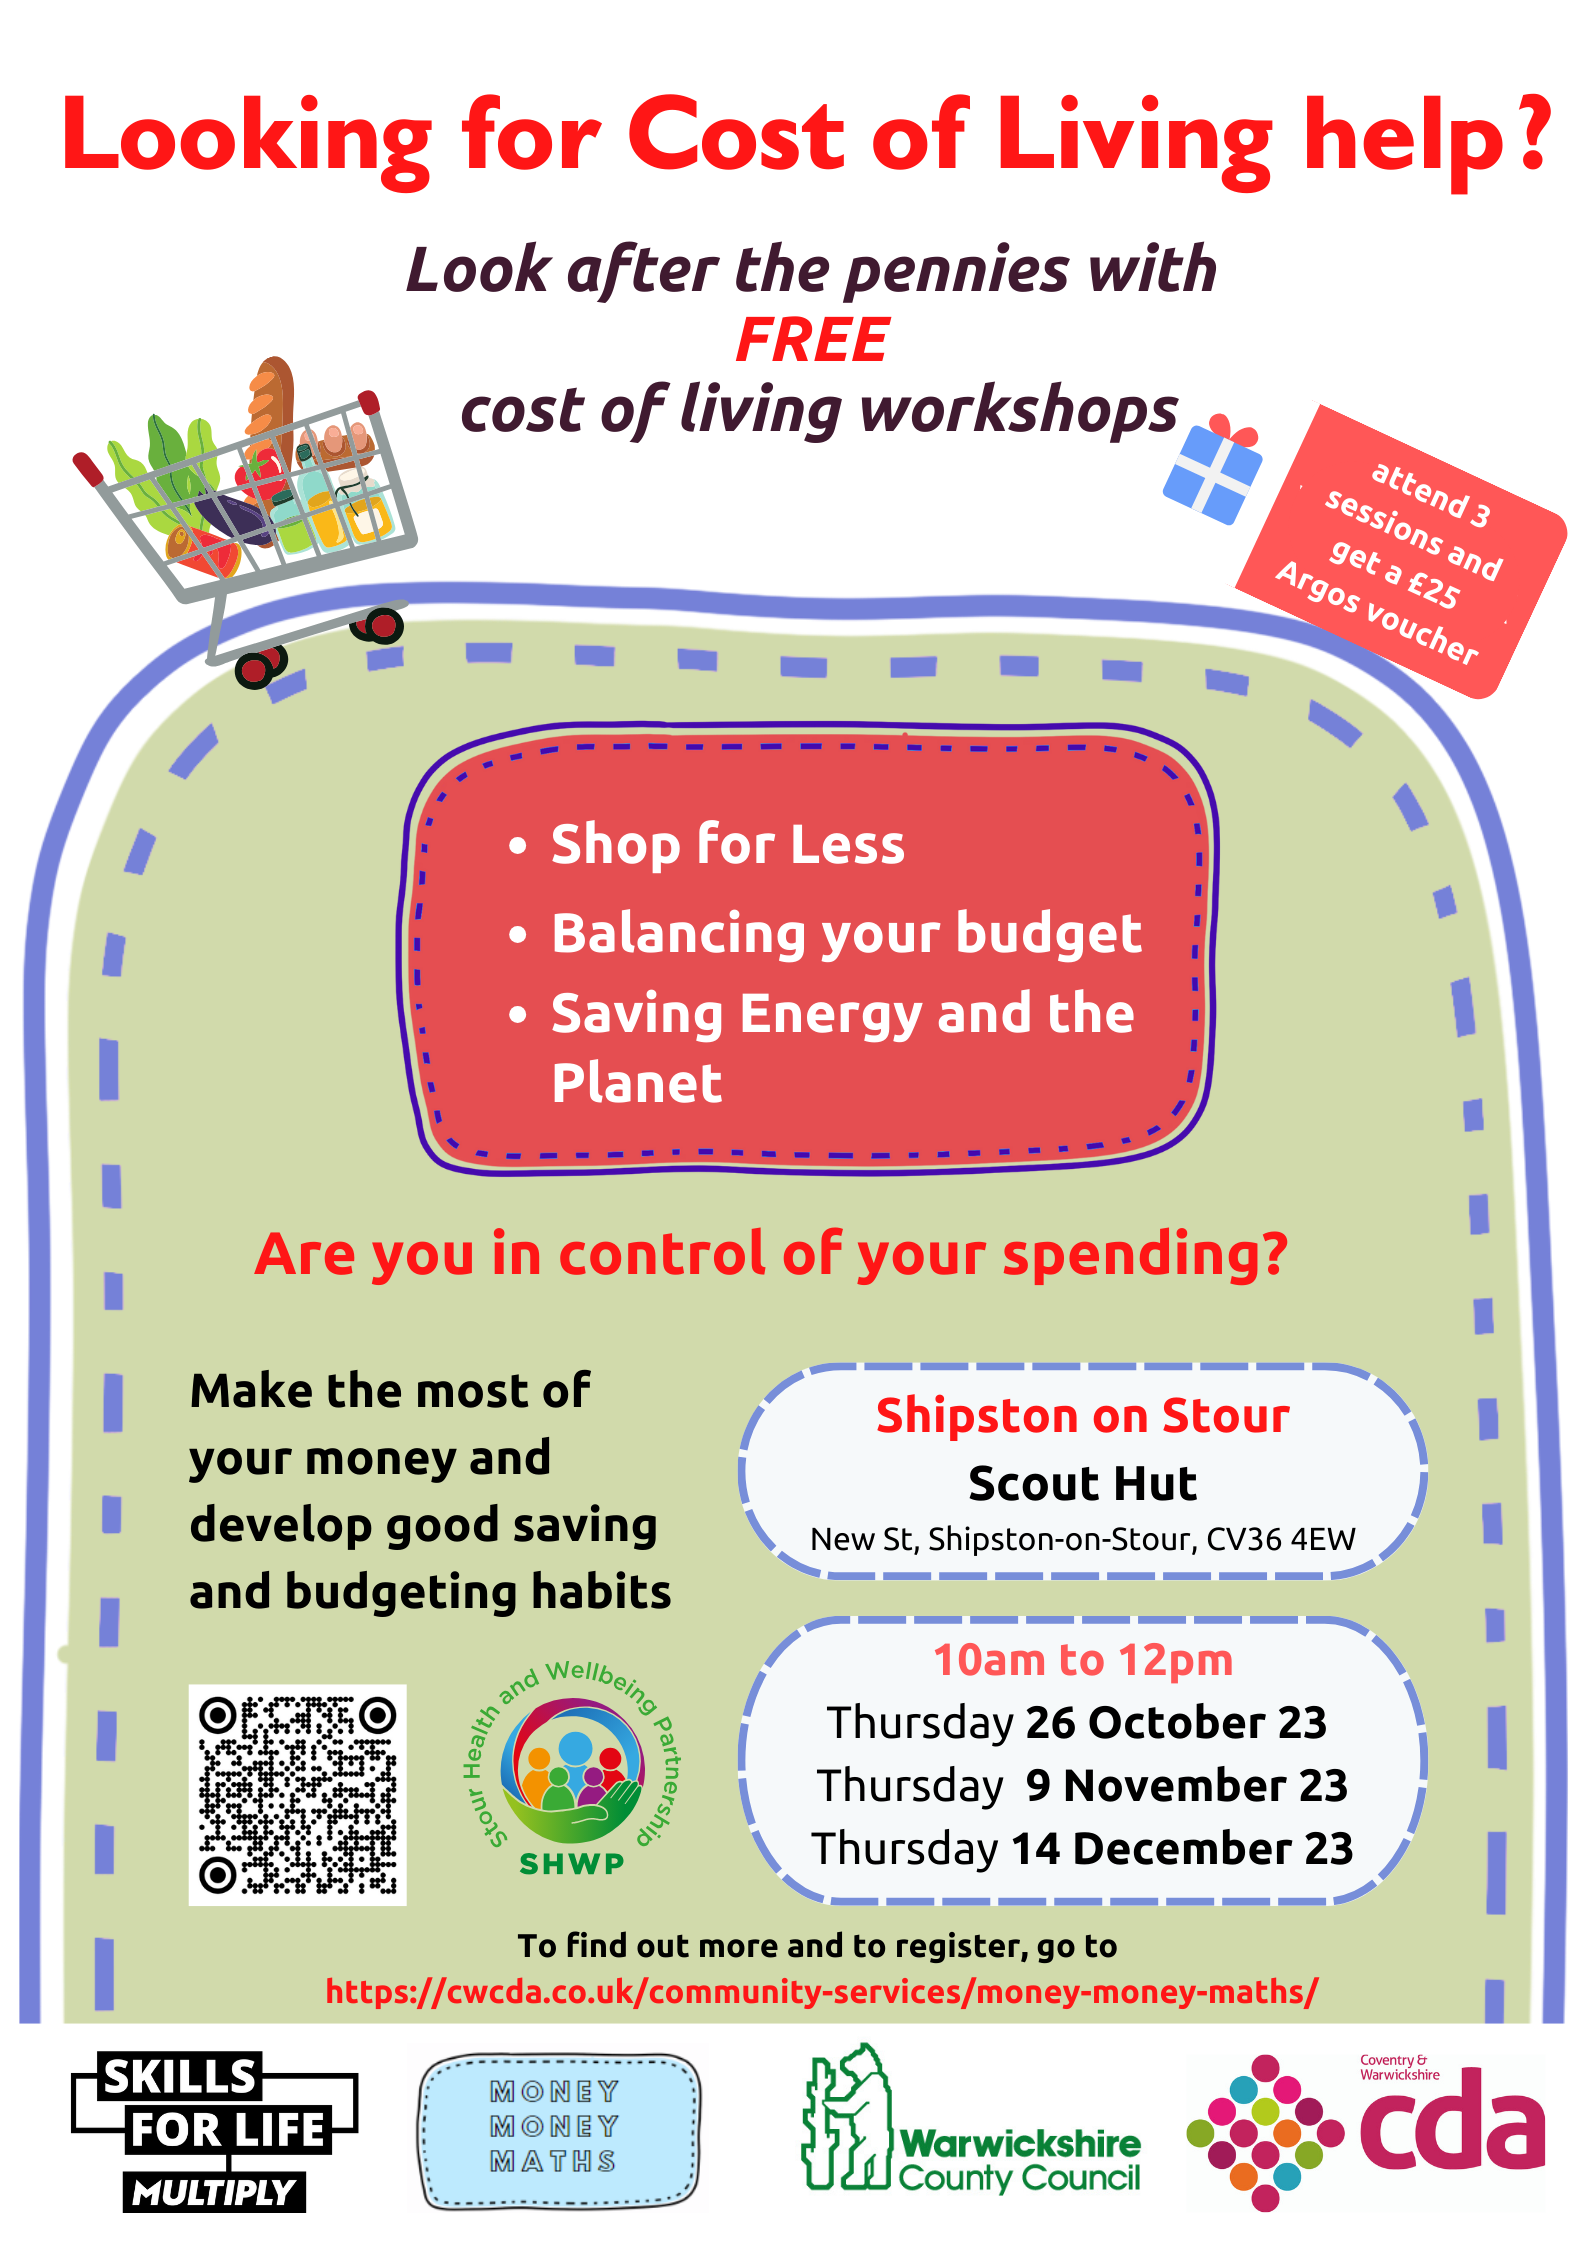 Reminder FREE cost of living workshops - attend three sessions and get a £25 Argos voucher, first one Thursday 26 October